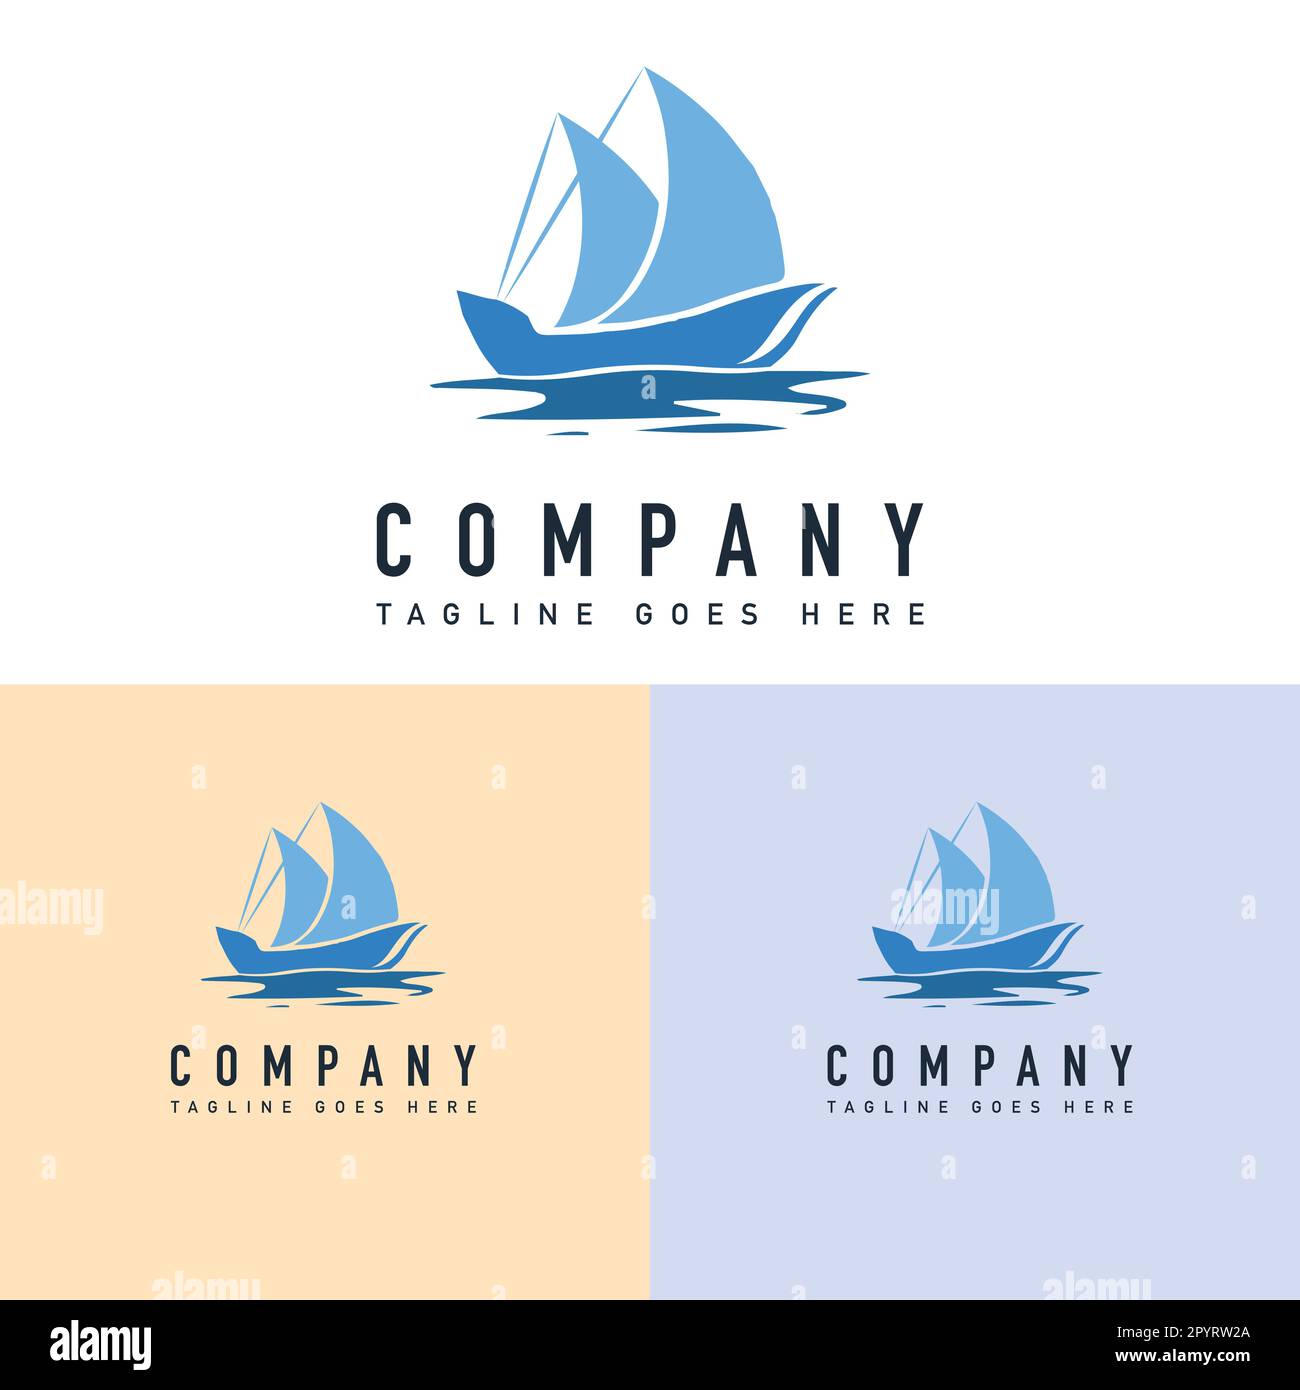 Boat Ship Logo Design. Sailing ship logo template vector icon element isolated on white background for business and corporate identity. Stock Vector